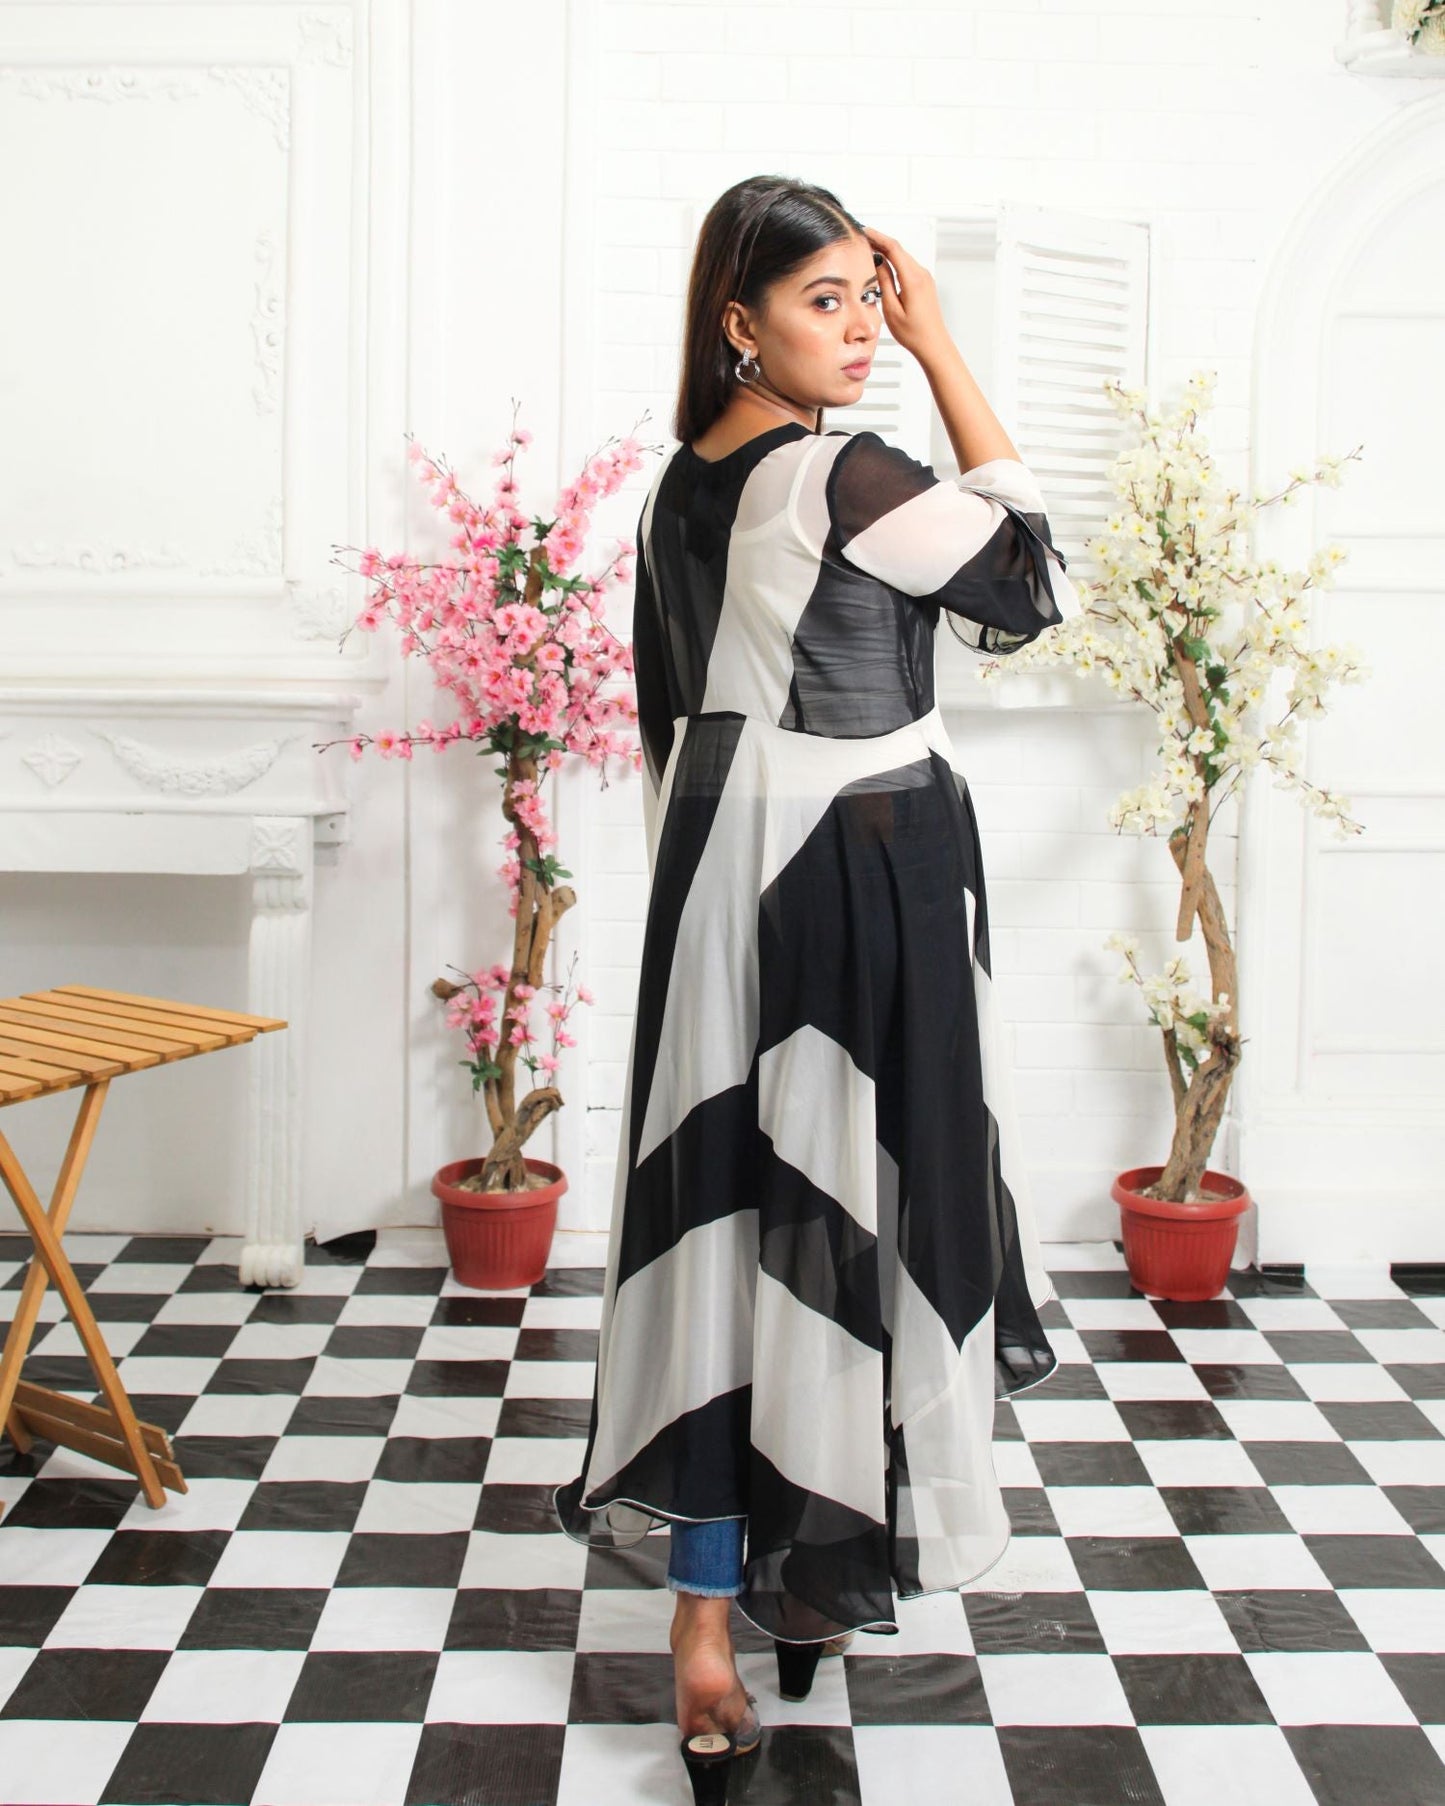 Black and White Chiffon High-Low Frock